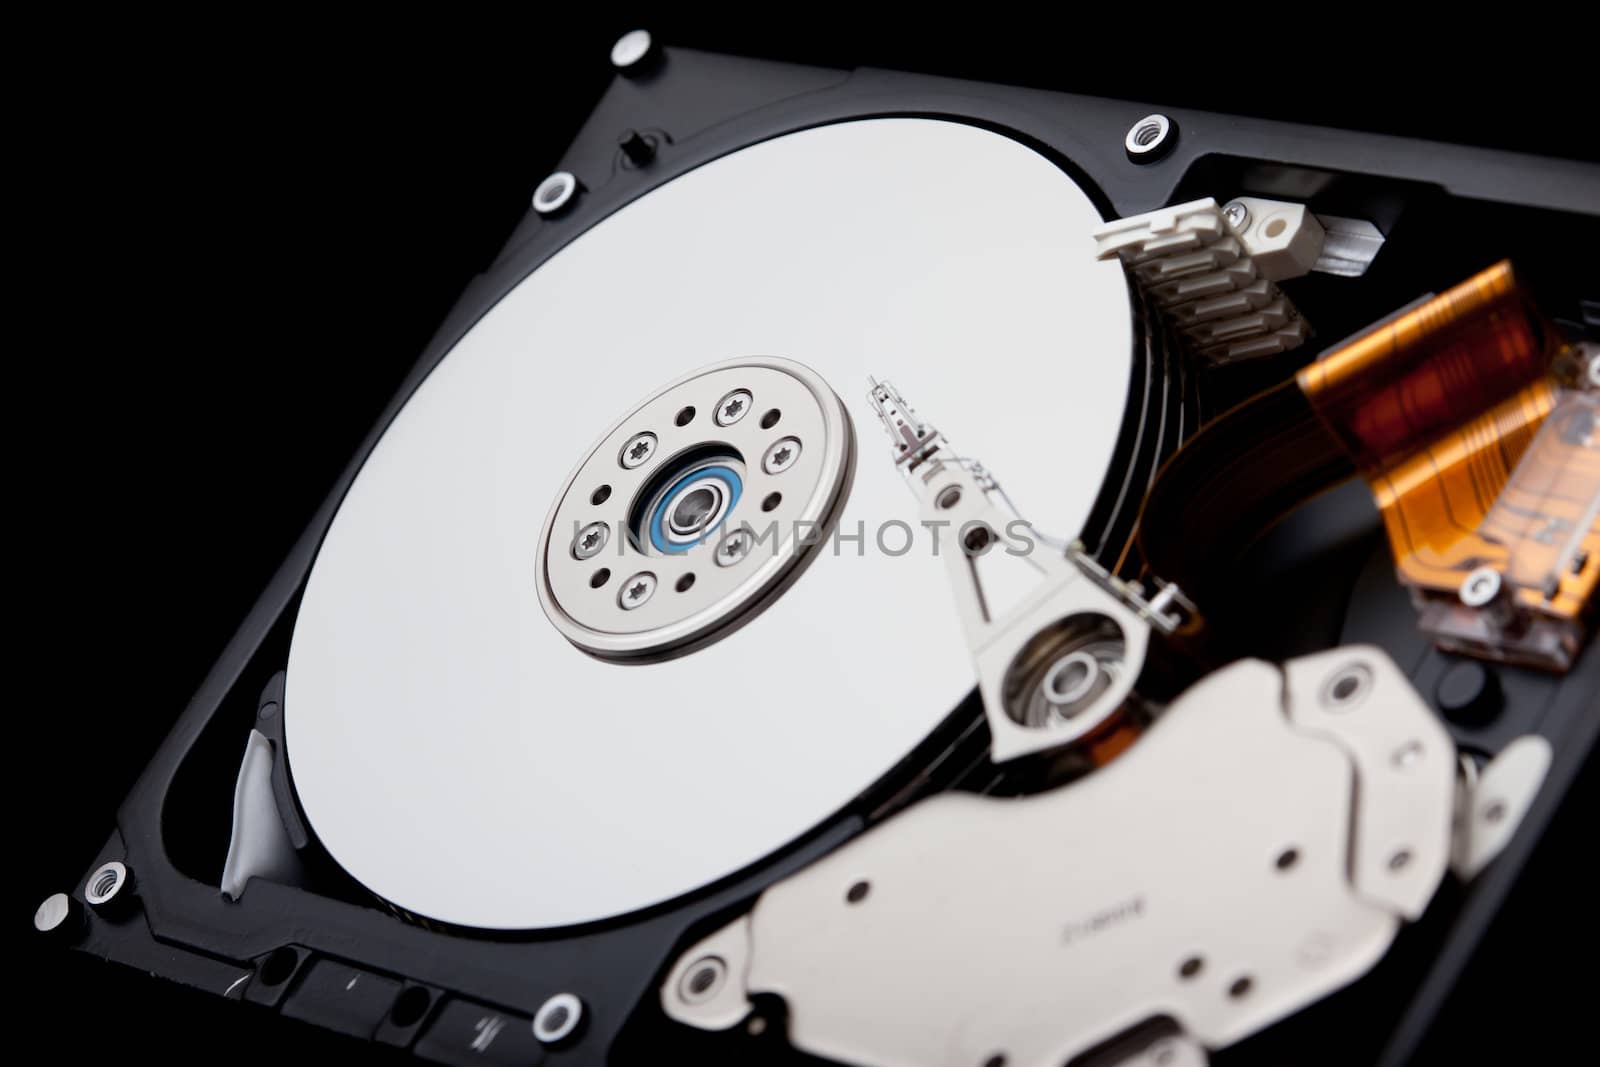 an opened hard disk on black background